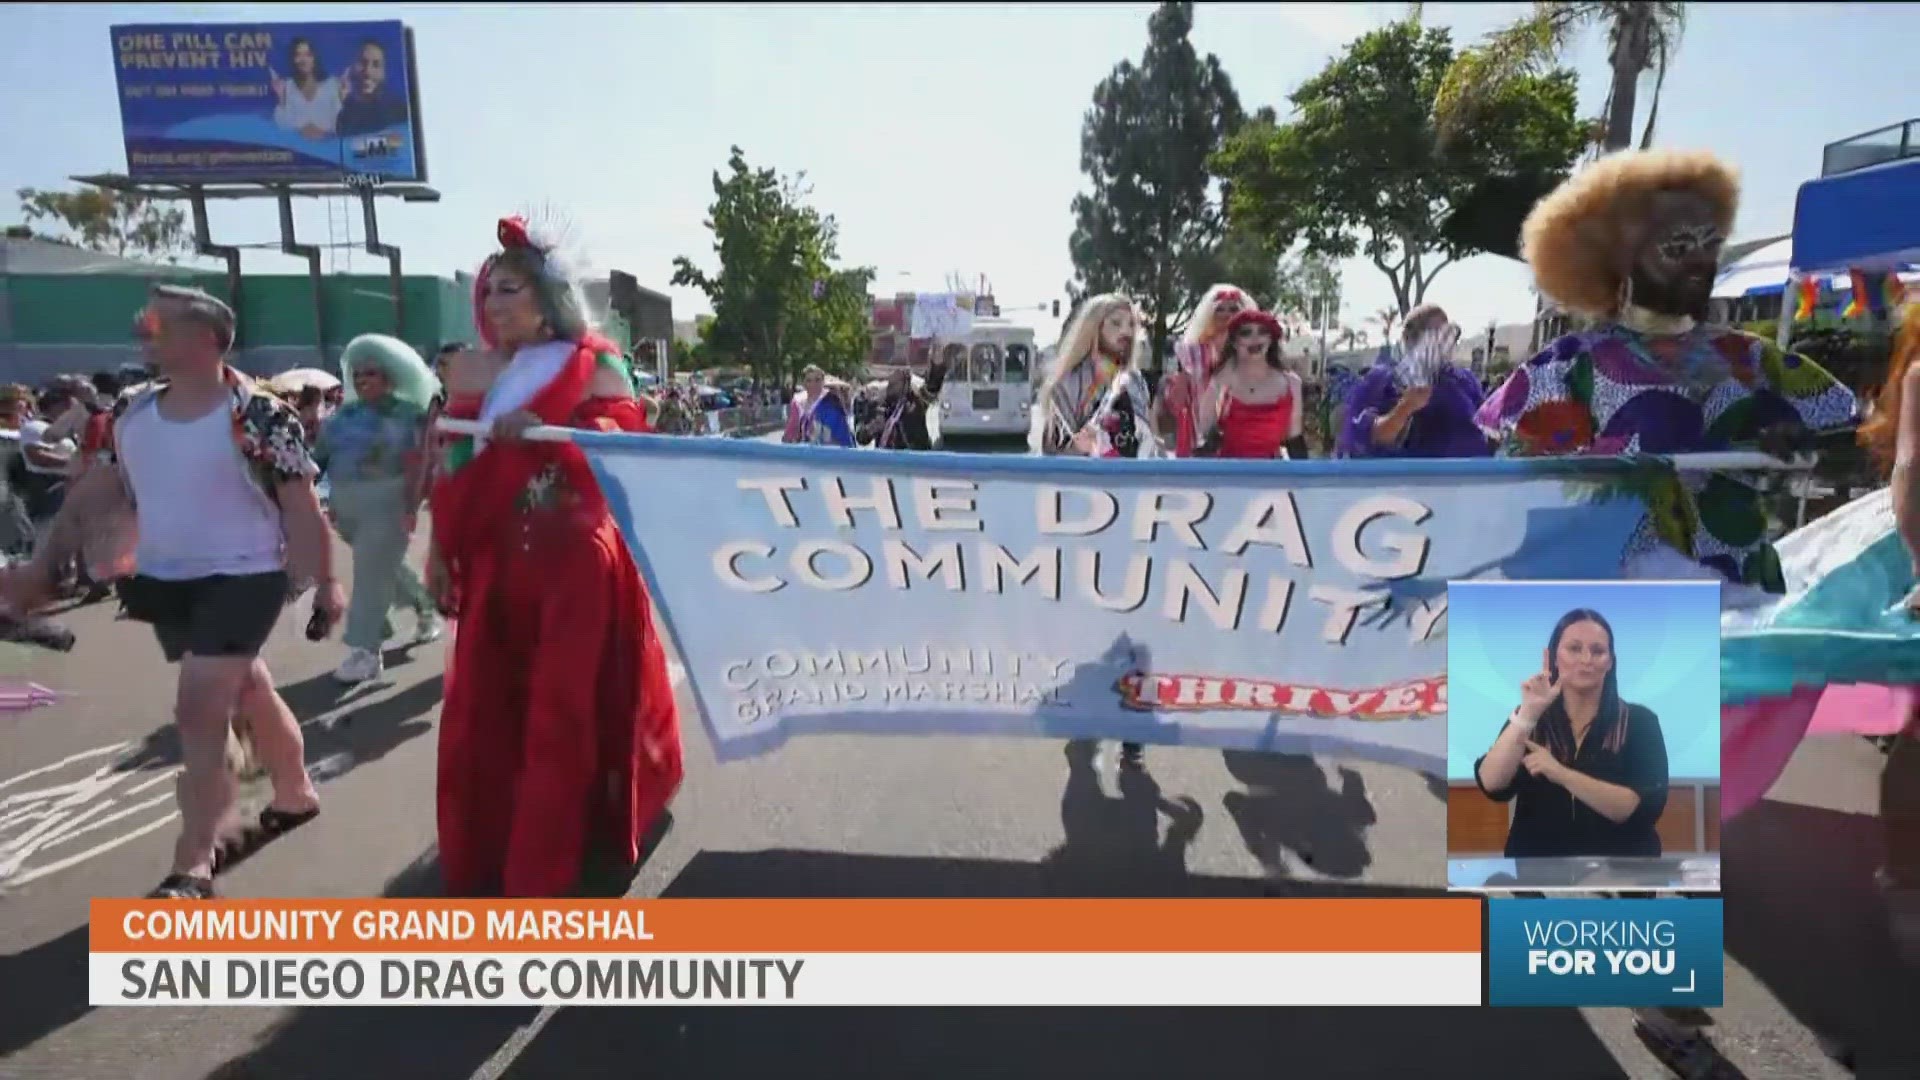 San Diego Pride is proud to honor the San Diego Drag Community as the 2023 Community Grand Marshal.